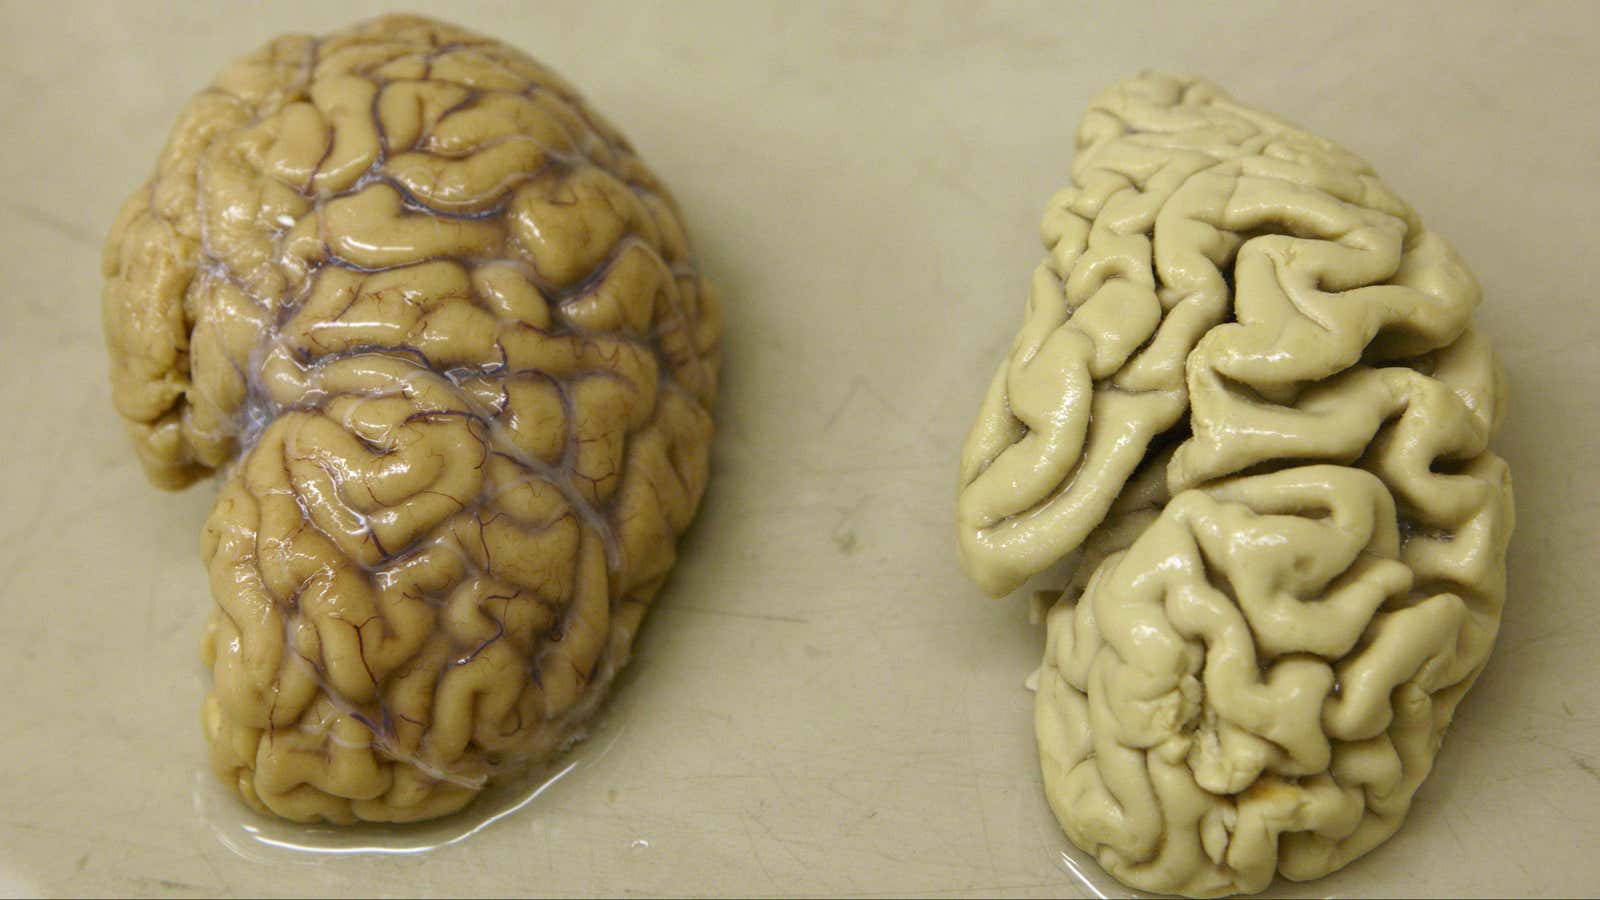 A healthy brain (left) next to a brain with Alzheimer’s disease.